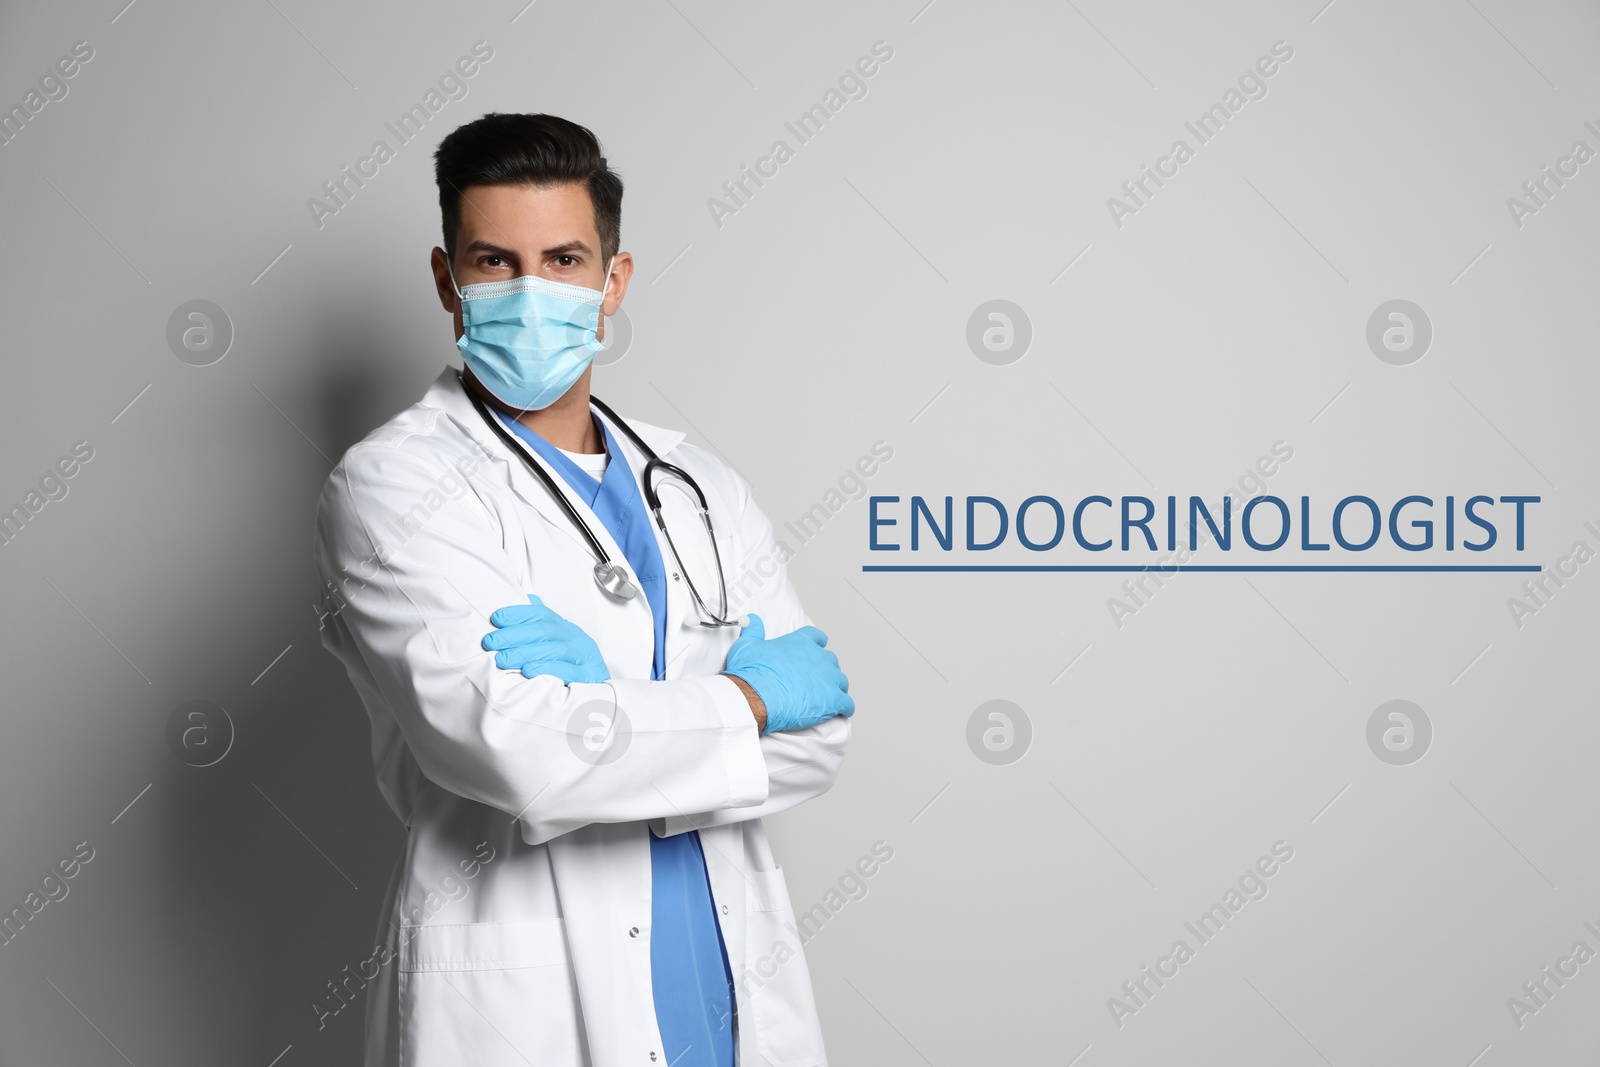 Image of Endocrinologist in protective mask and medical gloves on light grey background